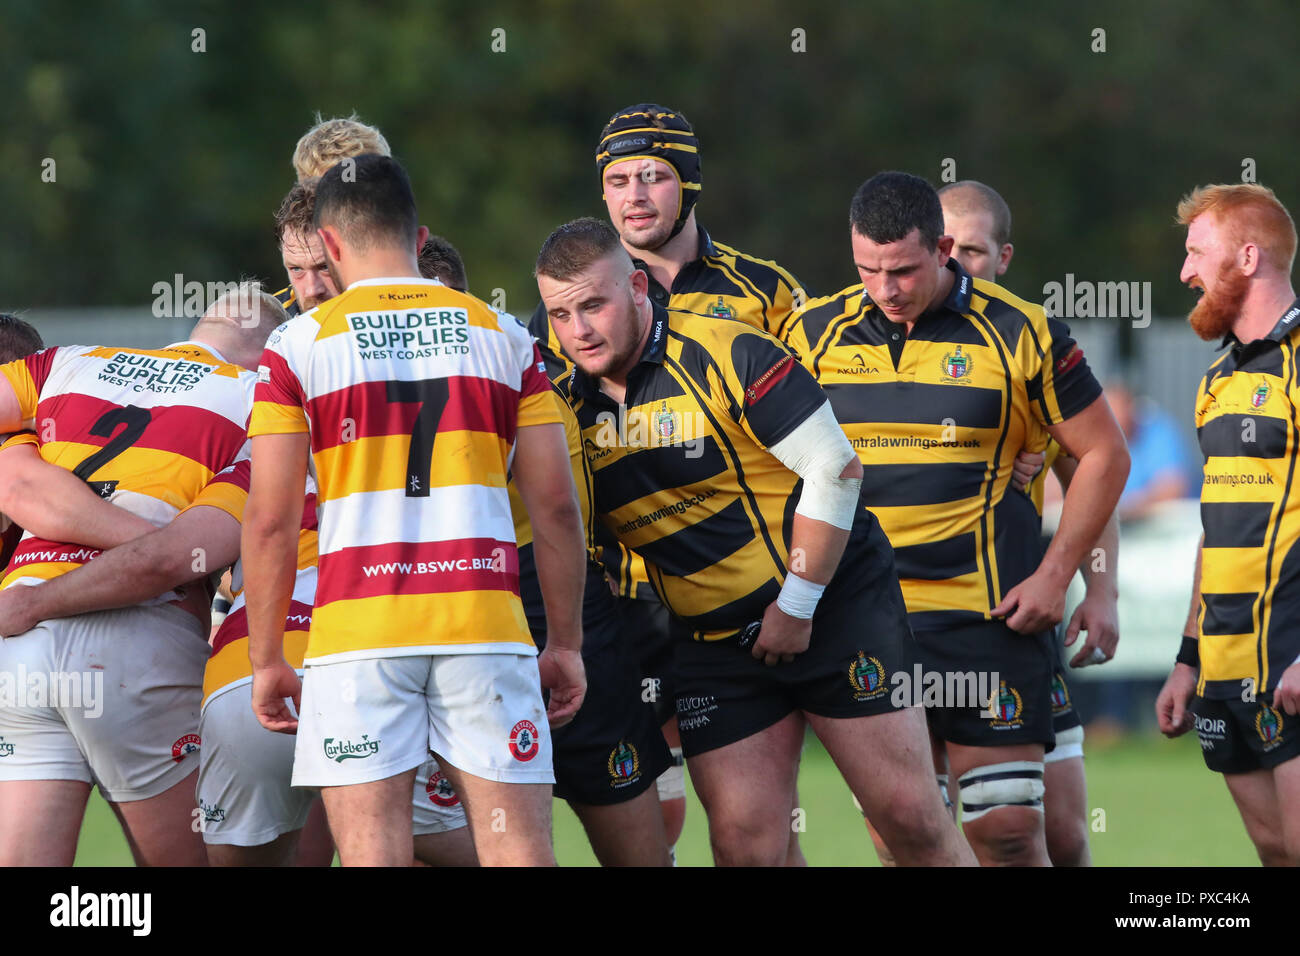 20.10.2018 Hinckley, Leicester, England. Rugby Union, Hinckley rfc v Fylde rfc.  Oscar Harper (Hinckley) preparing to scrum during the RFU National League 2 North (NL2N) game played at the Leicester  Road Stadium.    © Phil Hutchinson / Alamy Live News Stock Photo